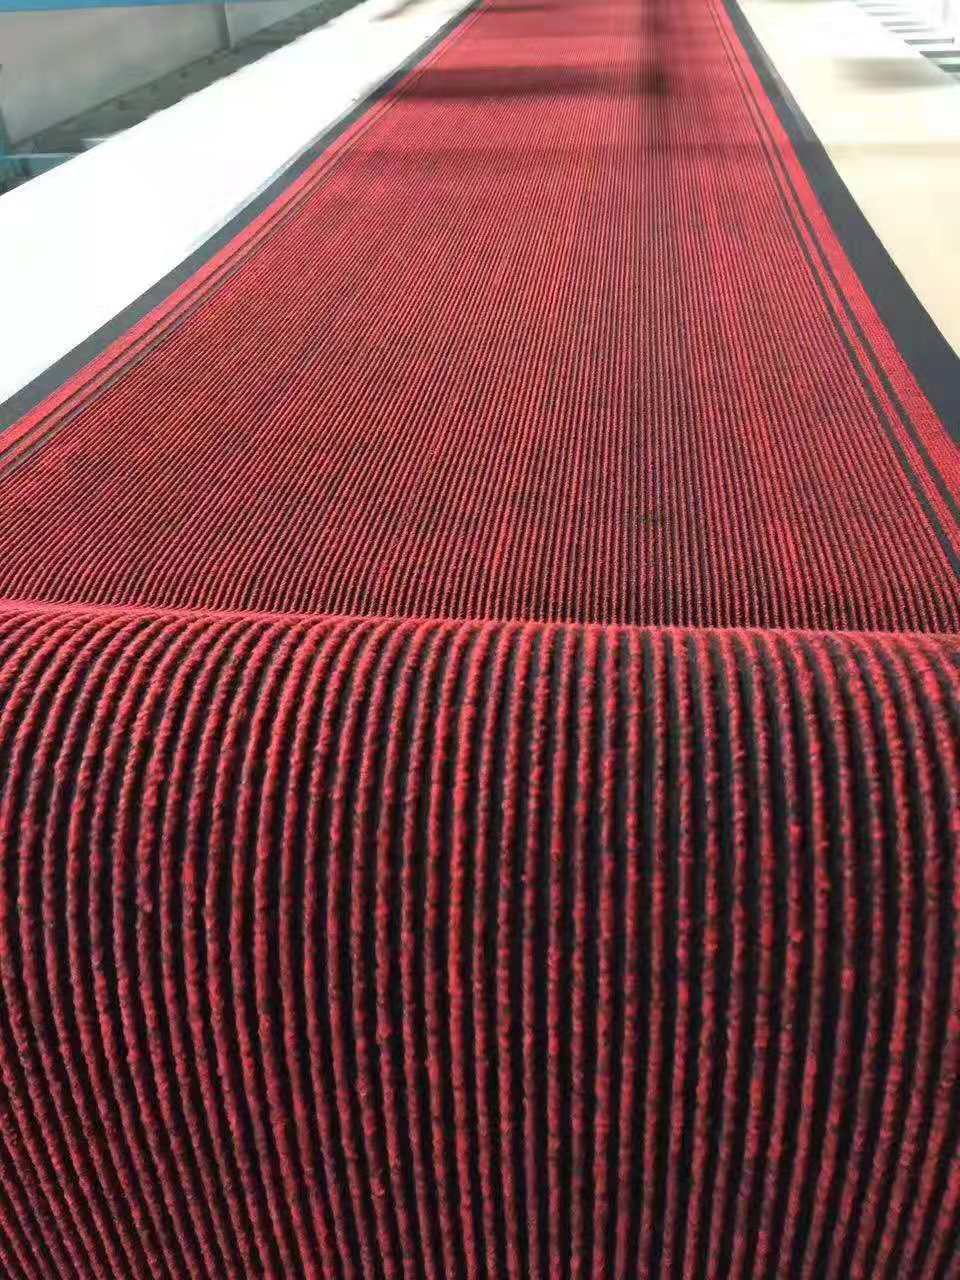 Factory Wholesale Pvc Single Stripe Carpet Entrance Welcome Doormat Commercial Covered Operating Room Corridor Step Door Mat